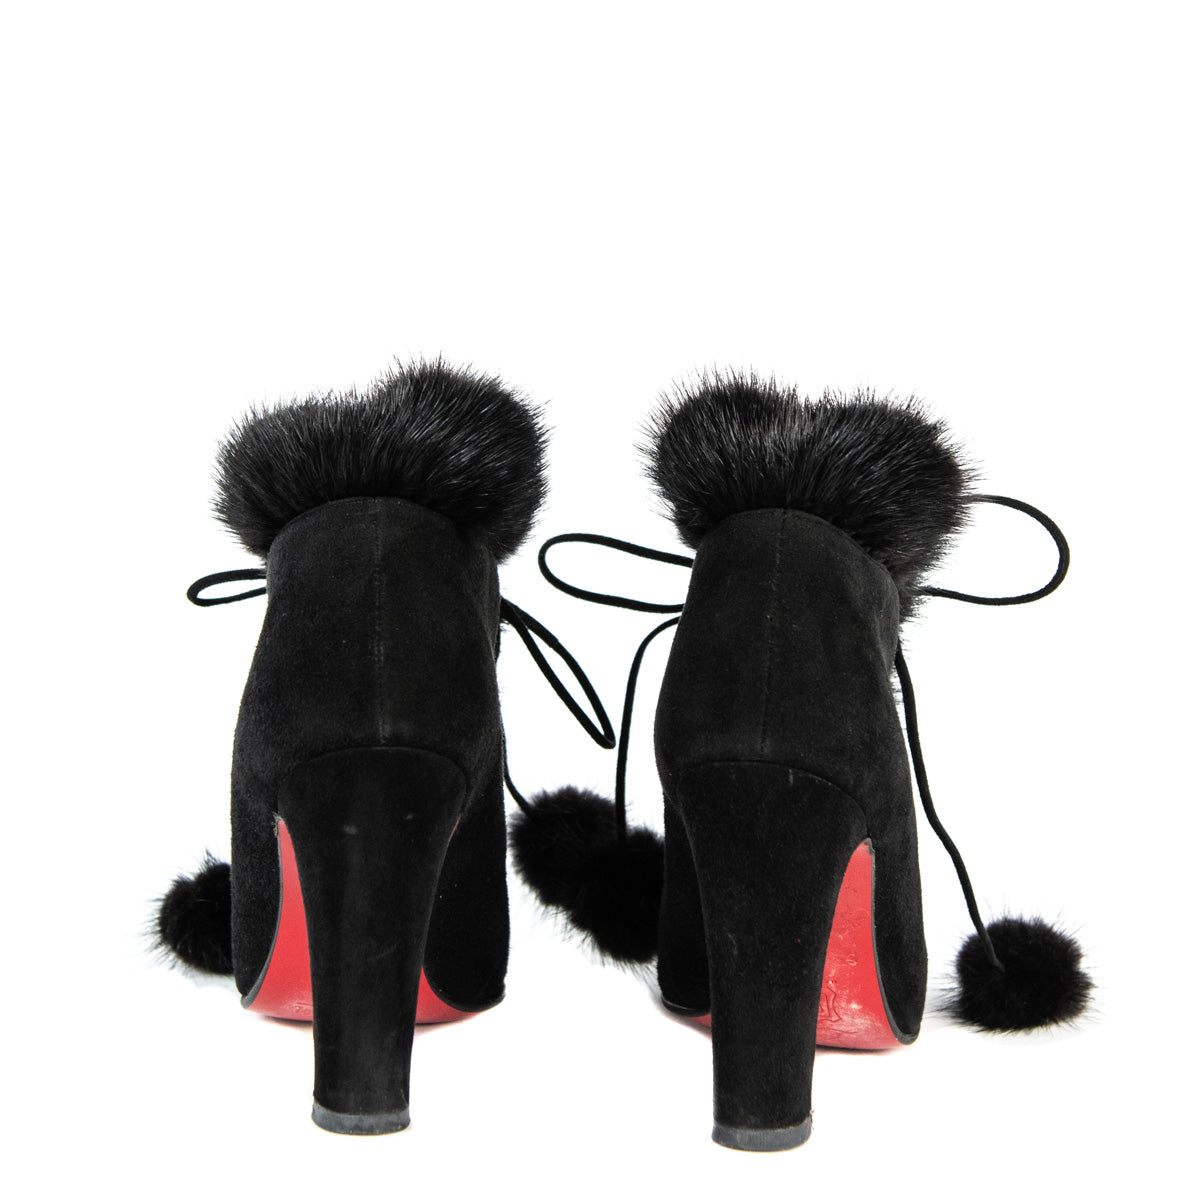 Christian Louboutin Boots in Nigeria for sale ▷ Prices on